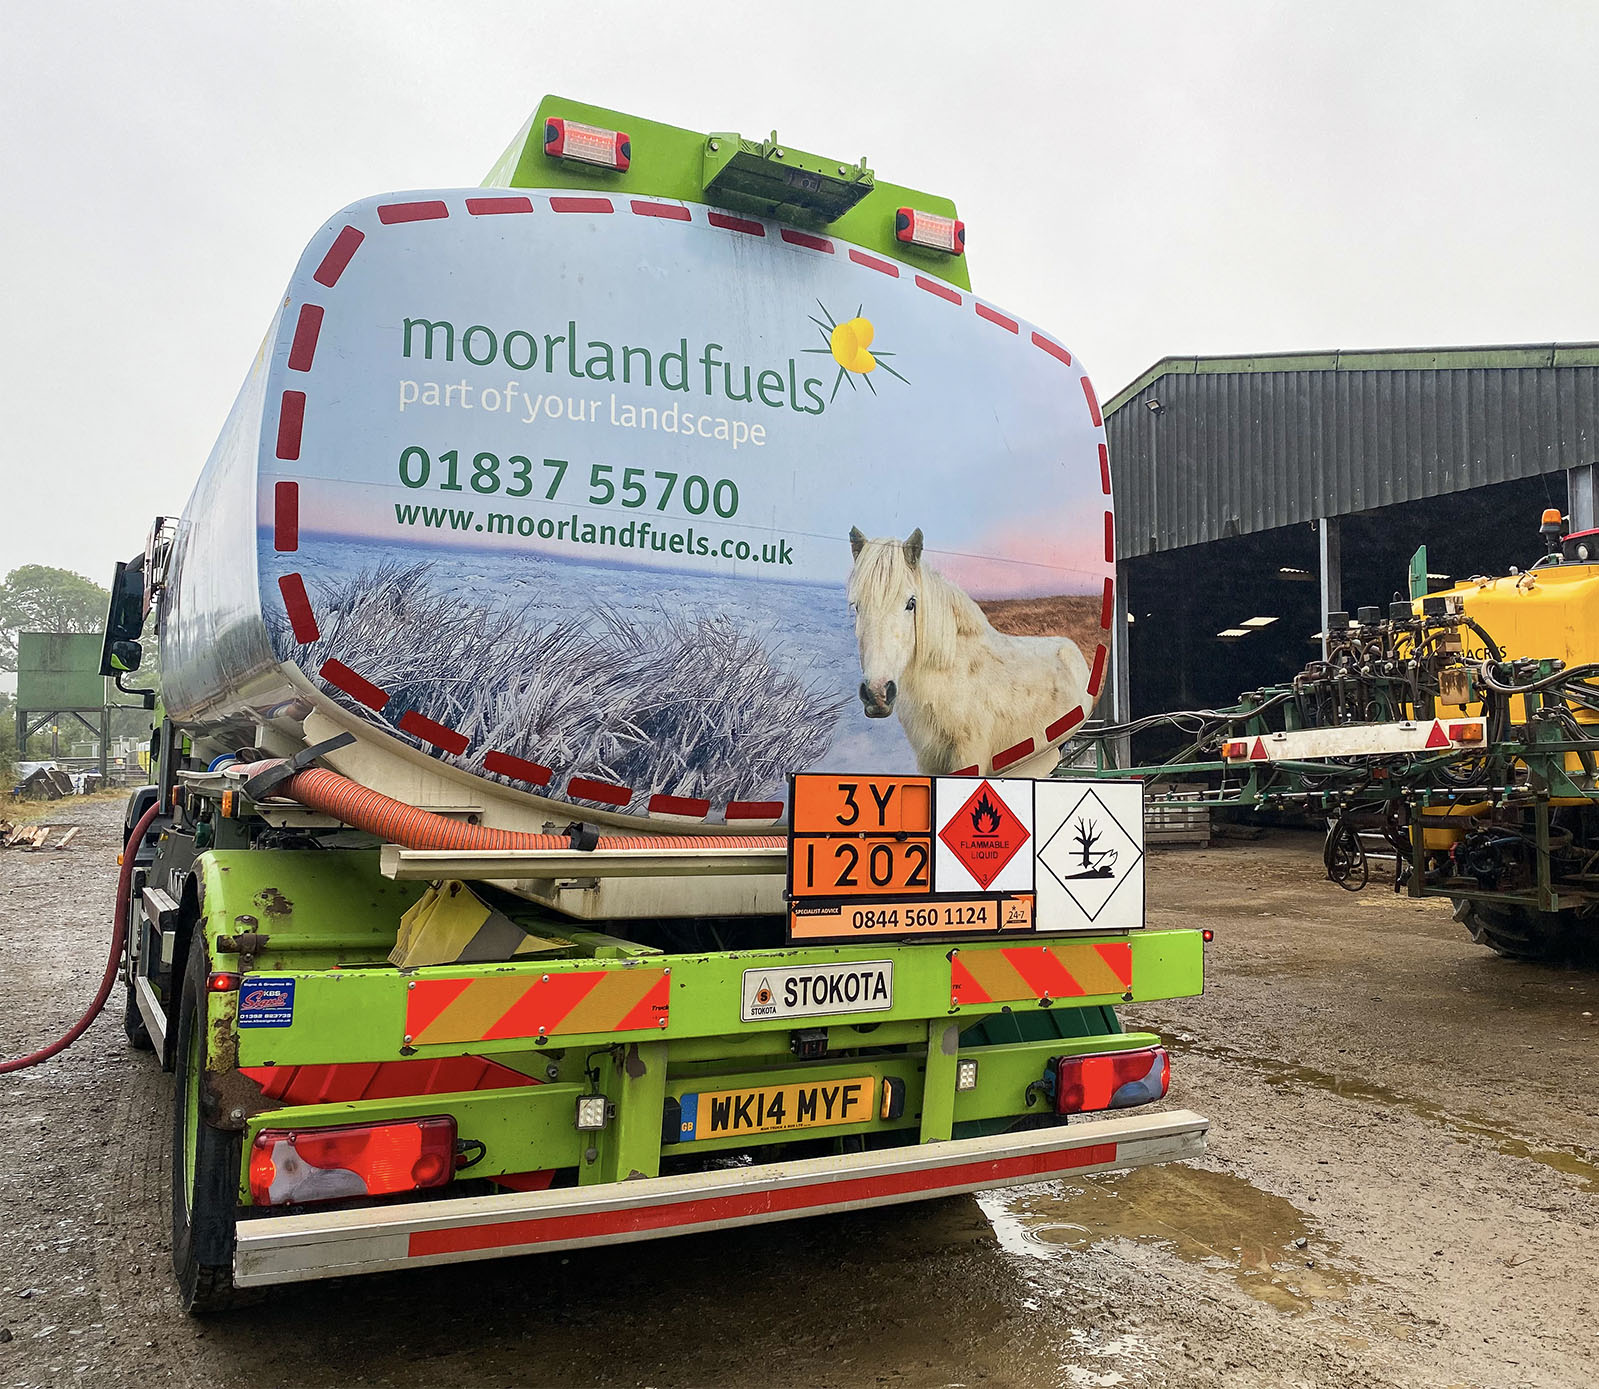 Moorland Fuels tankers on a farm with agri equipment